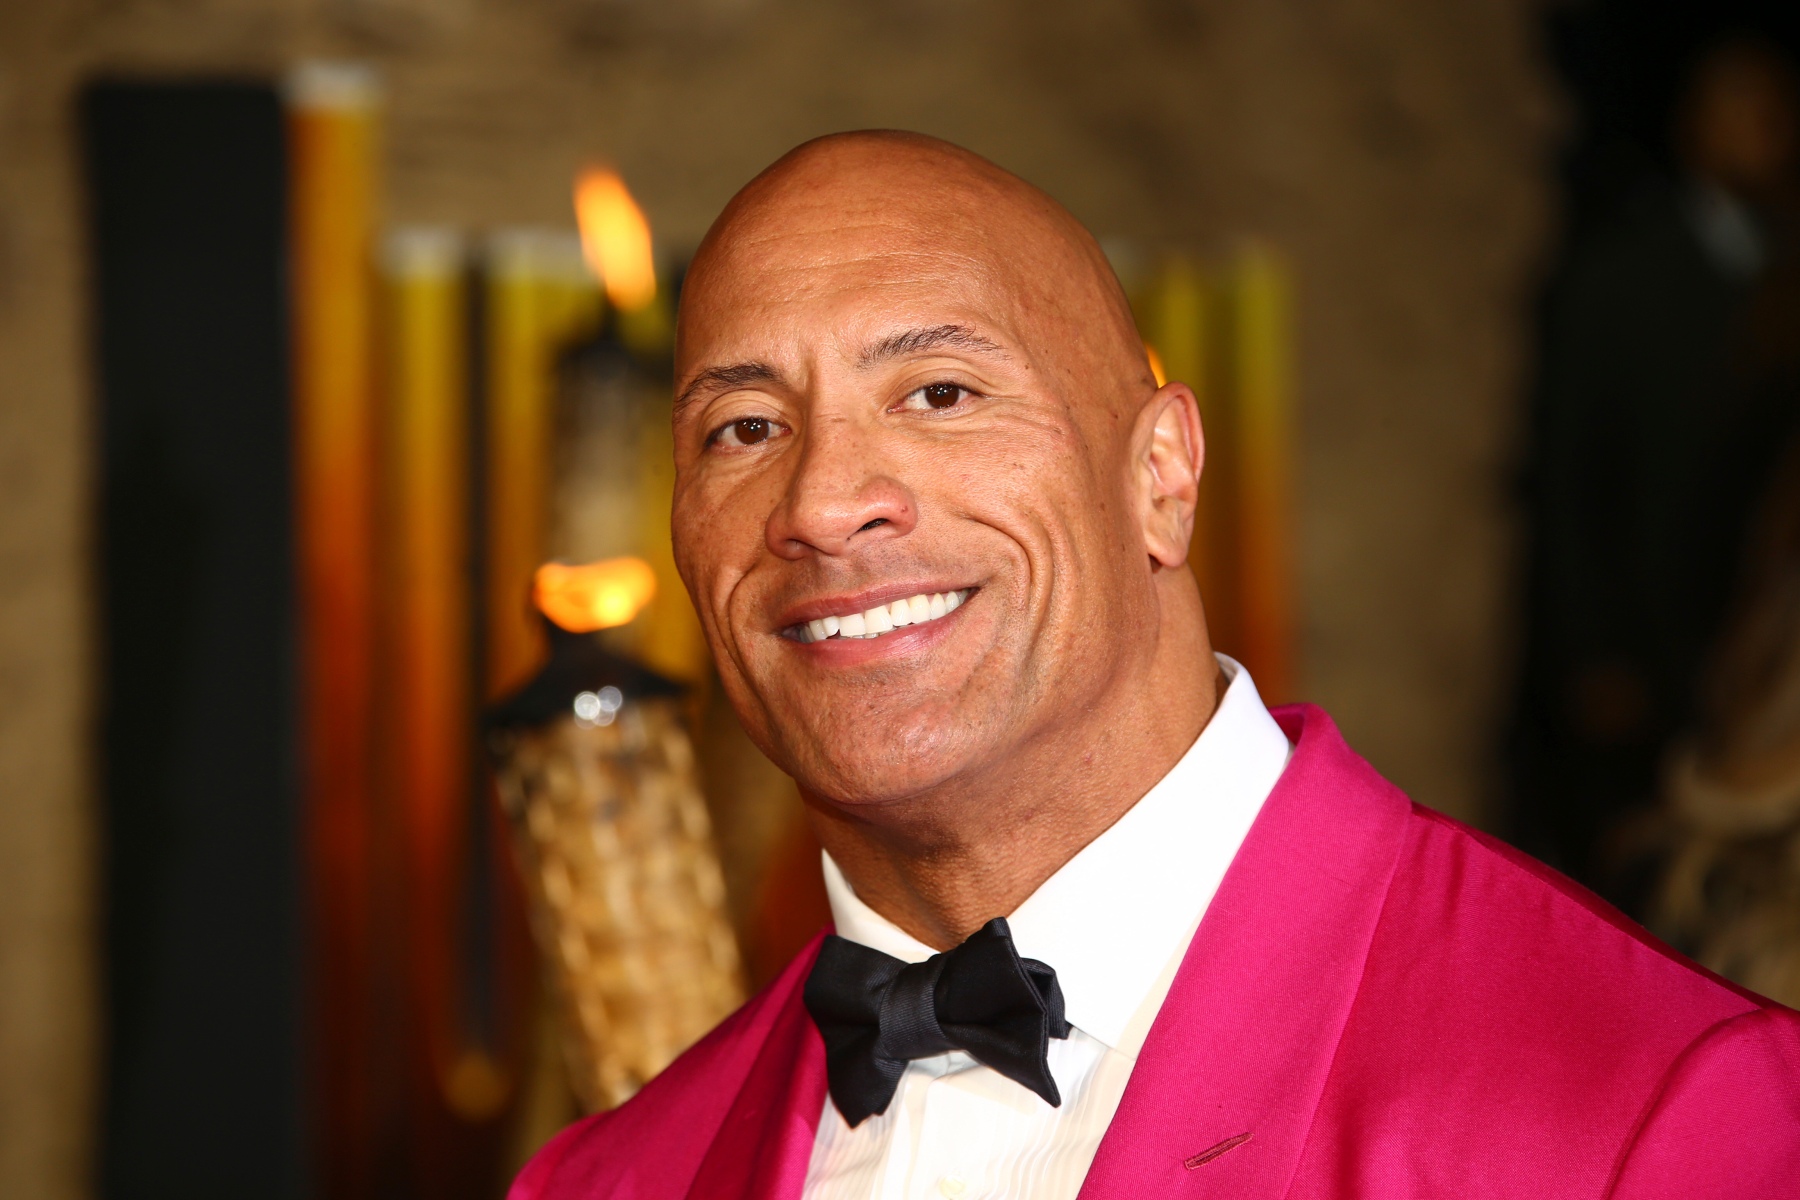 Dwayne ‘The Rock’ Johnson to be honored with “The People’s Champion” award at 2021 “People’s Choice Awards”